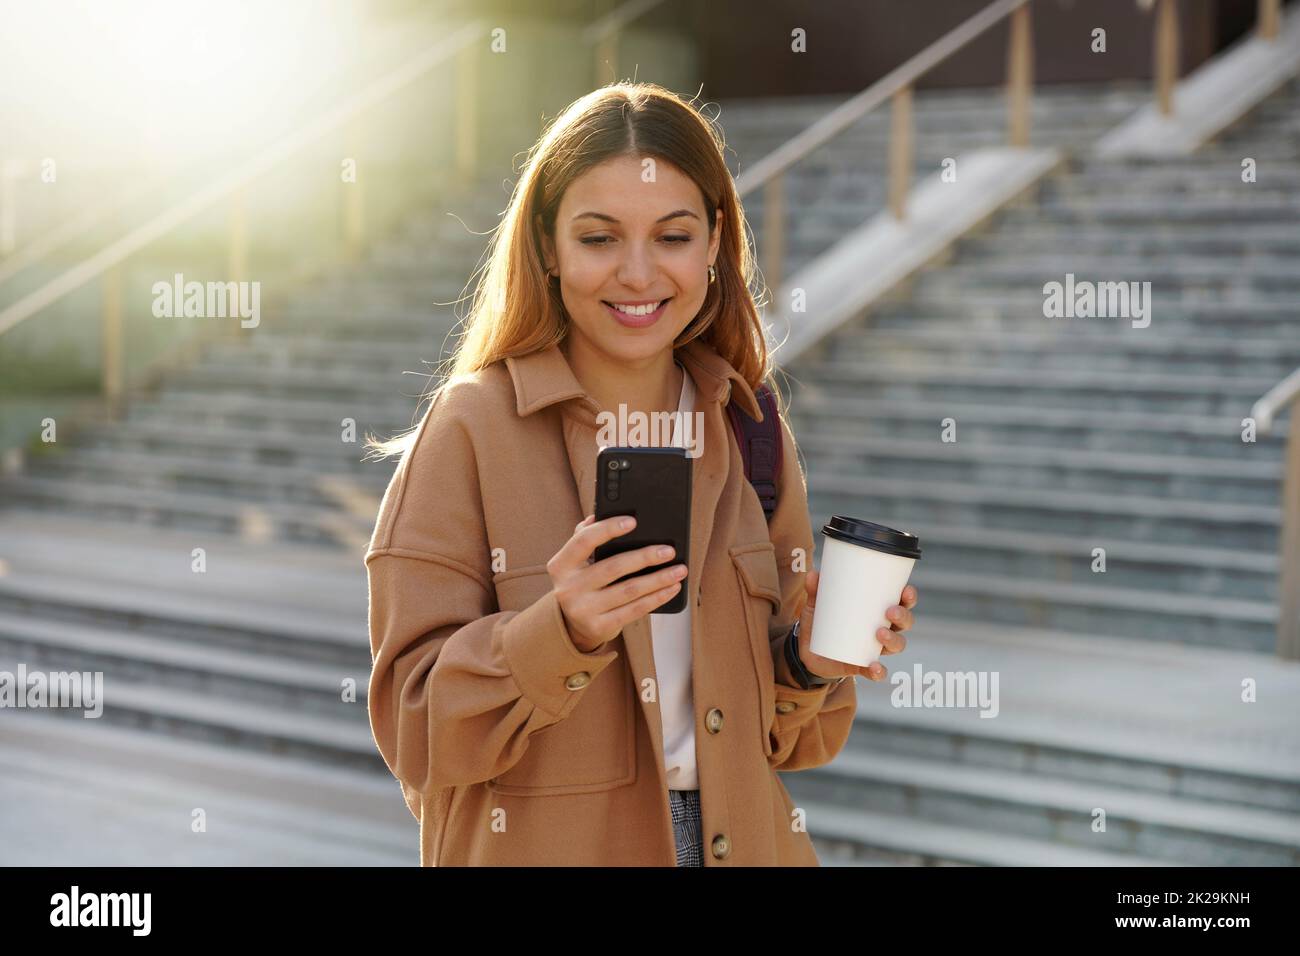 Enchanting blonde young woman waiting for phone message while carrying coffee cup on the street. Stylish girl in spring clothing holding smartphone and take-away cappuccino. Stock Photo